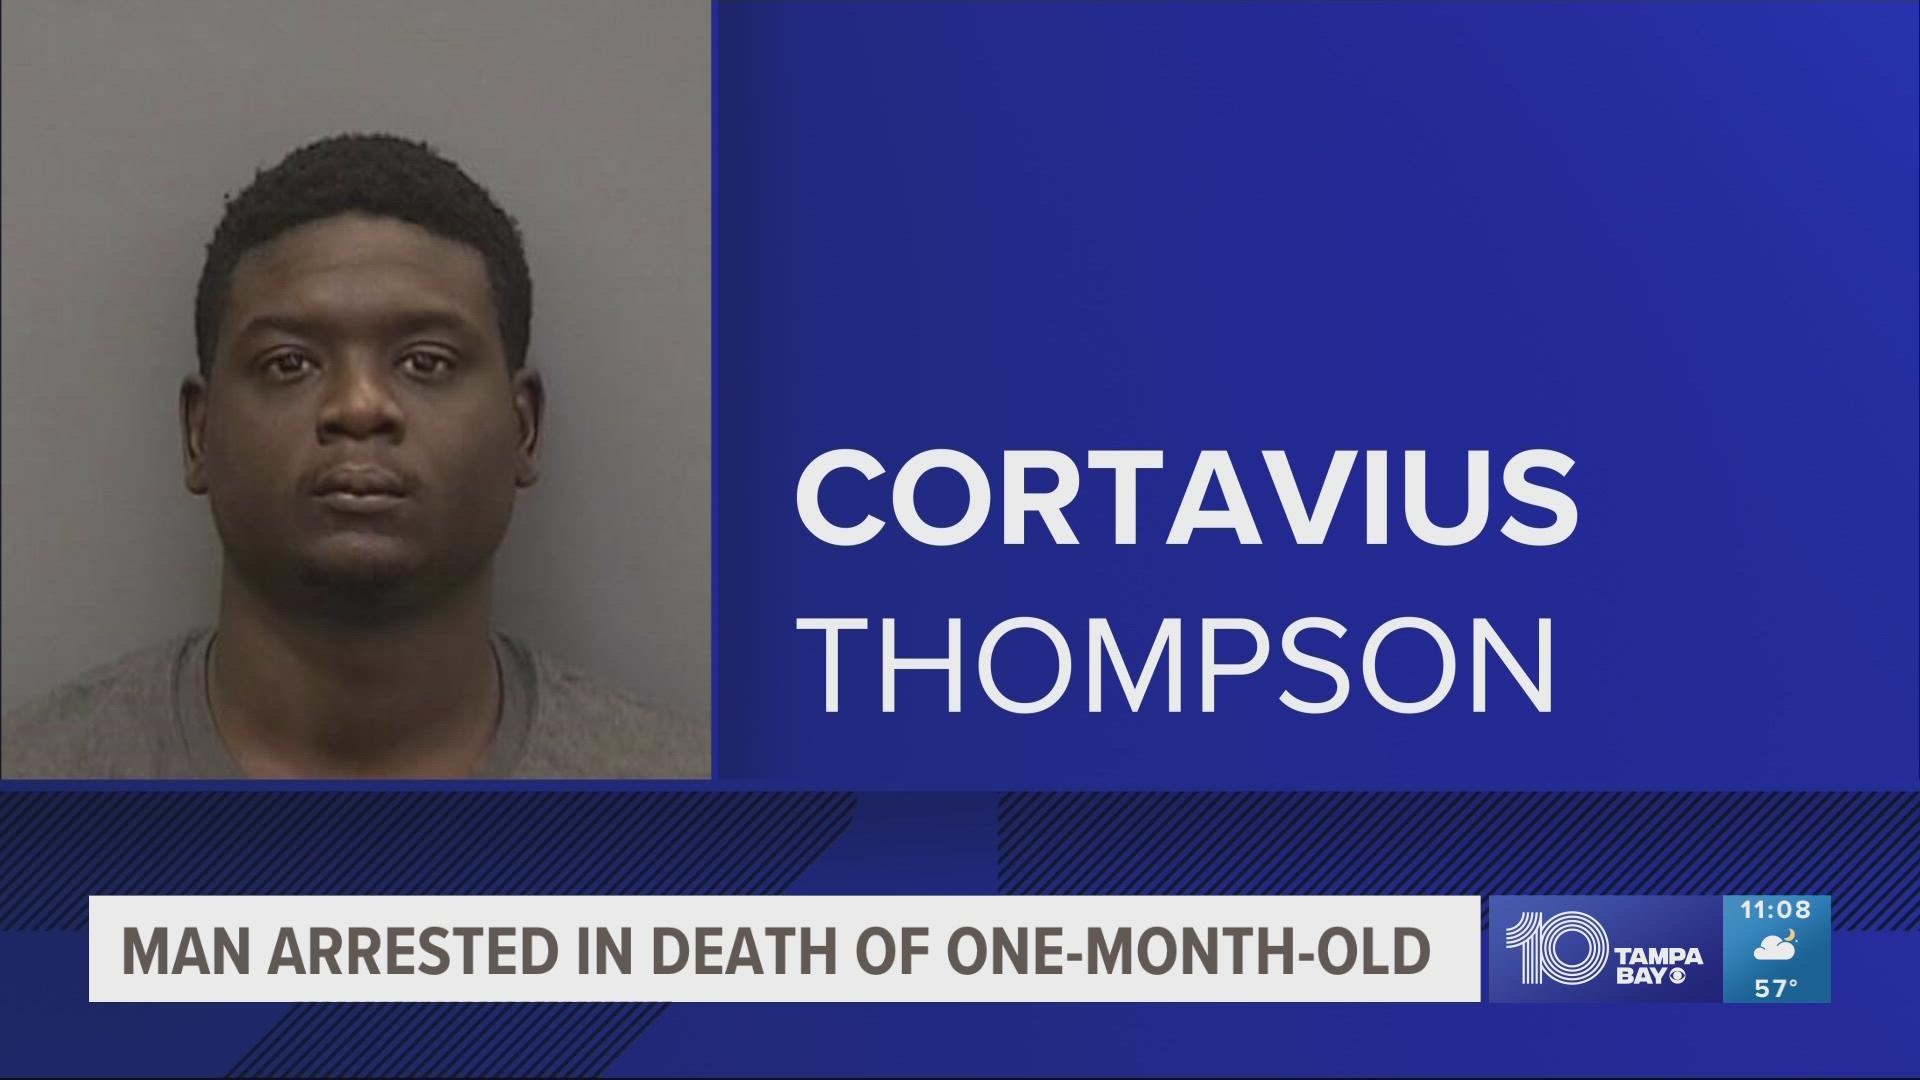 Cortavius Thompson remains in the Orient Jail without bond and is facing charges of first-degree murder while engaged in child abuse.